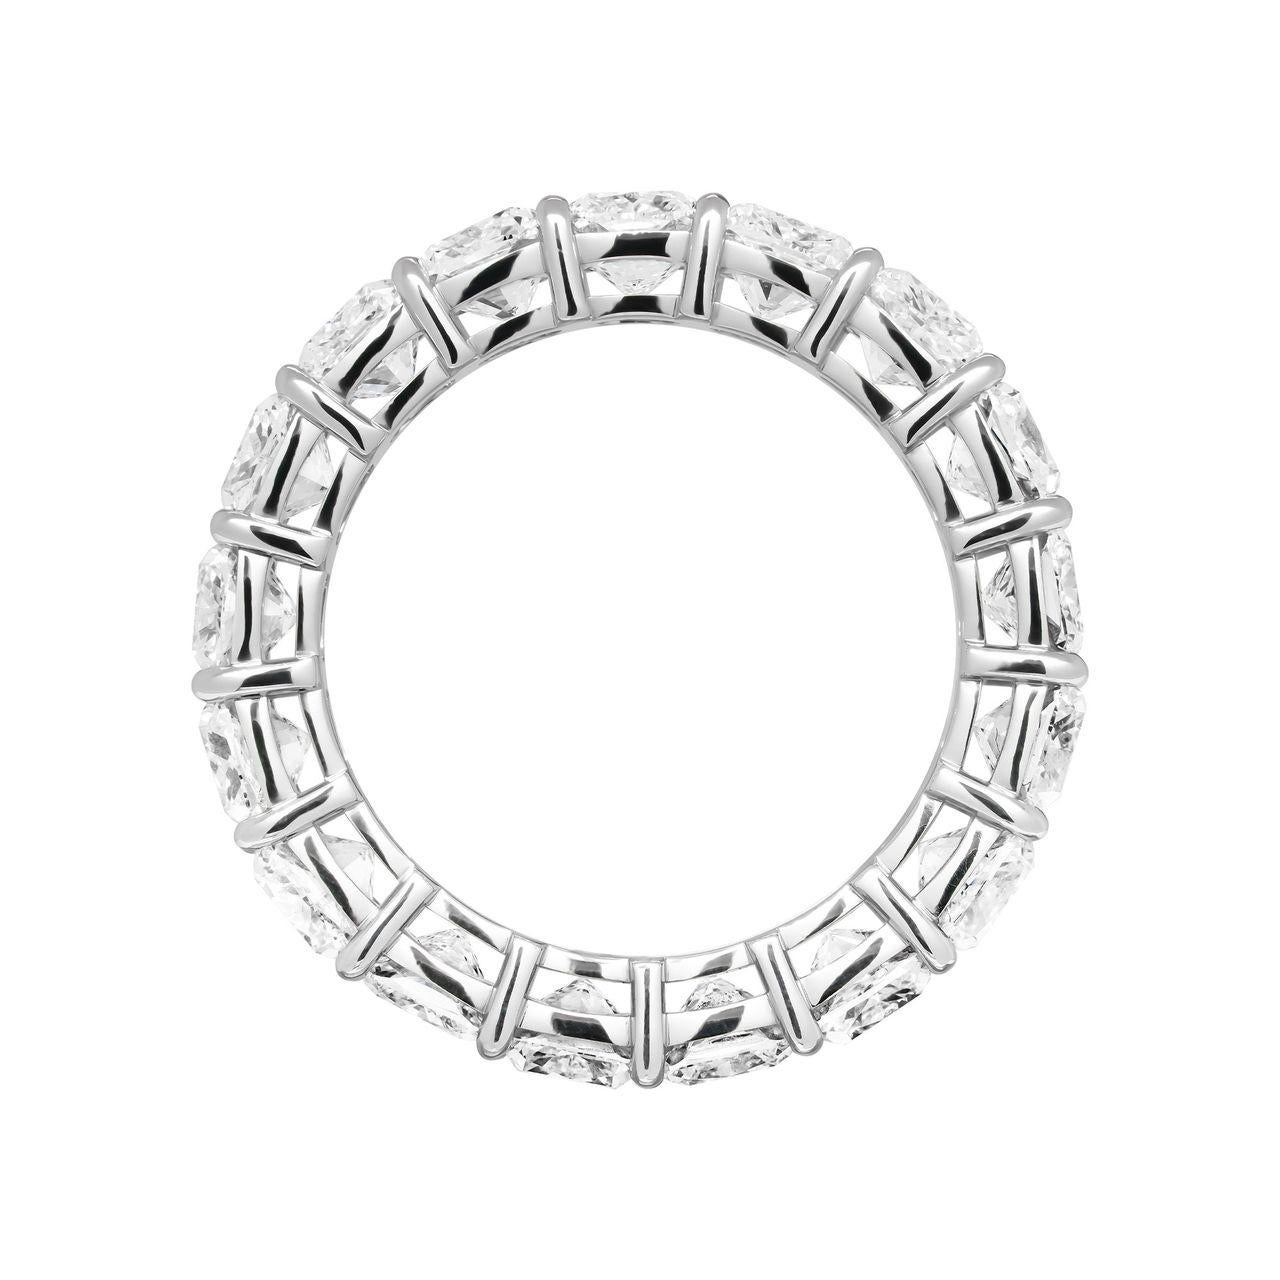 Eternity band with 7.92 Carat Emerald Cut Diamonds Mounted in Platinum 950, 20 Emerald cut diamonds won't miss a sparkle! Beautiful cut, bold and classy Each stone is 0.4ct -  All stone are estimated G+ color and VVS clarity, very eye clean